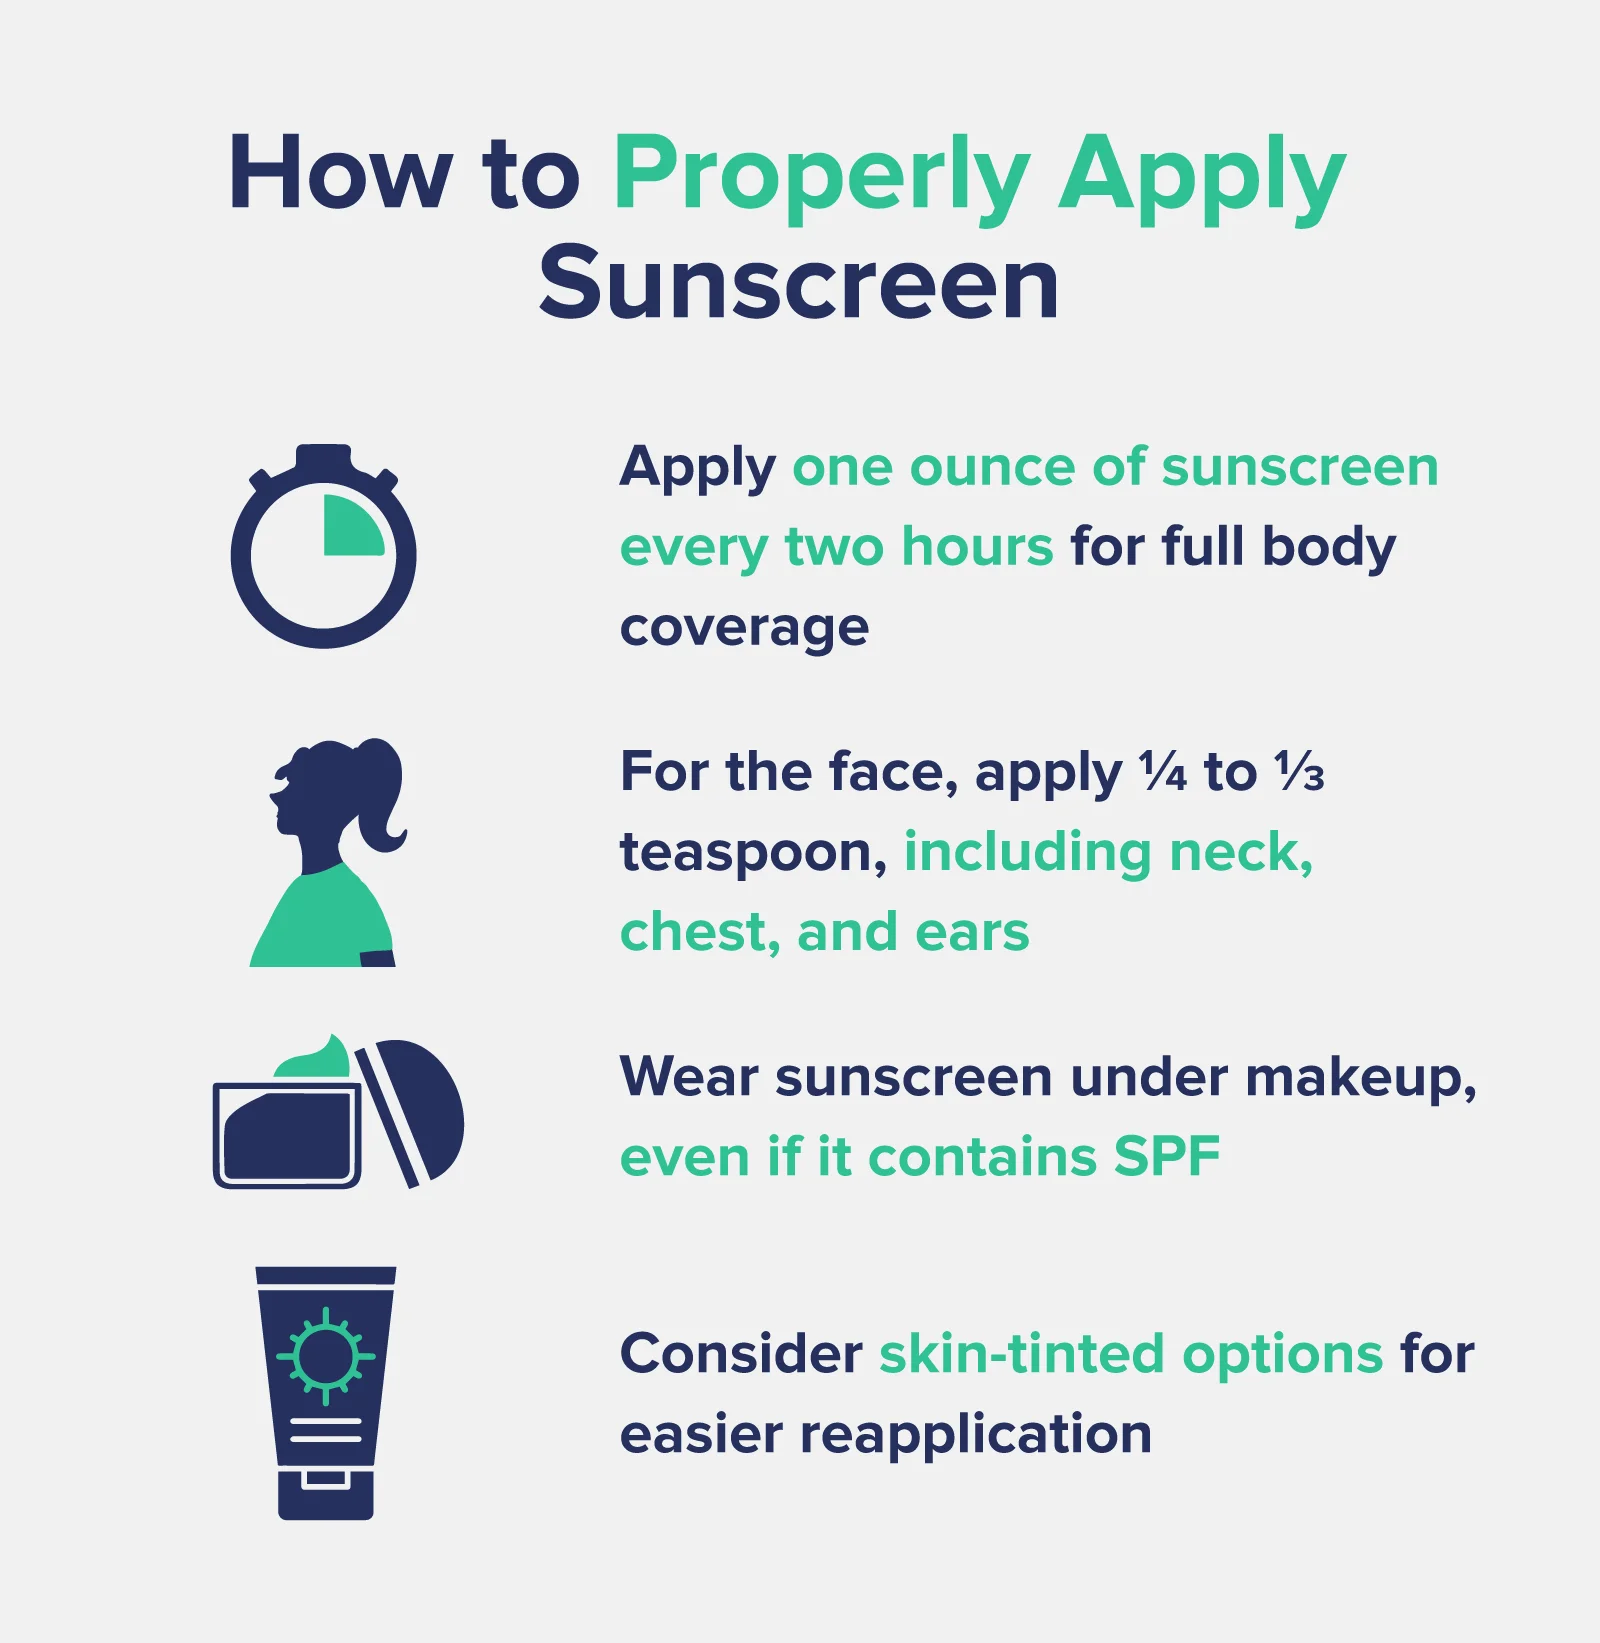 how to properly apply sunscreen